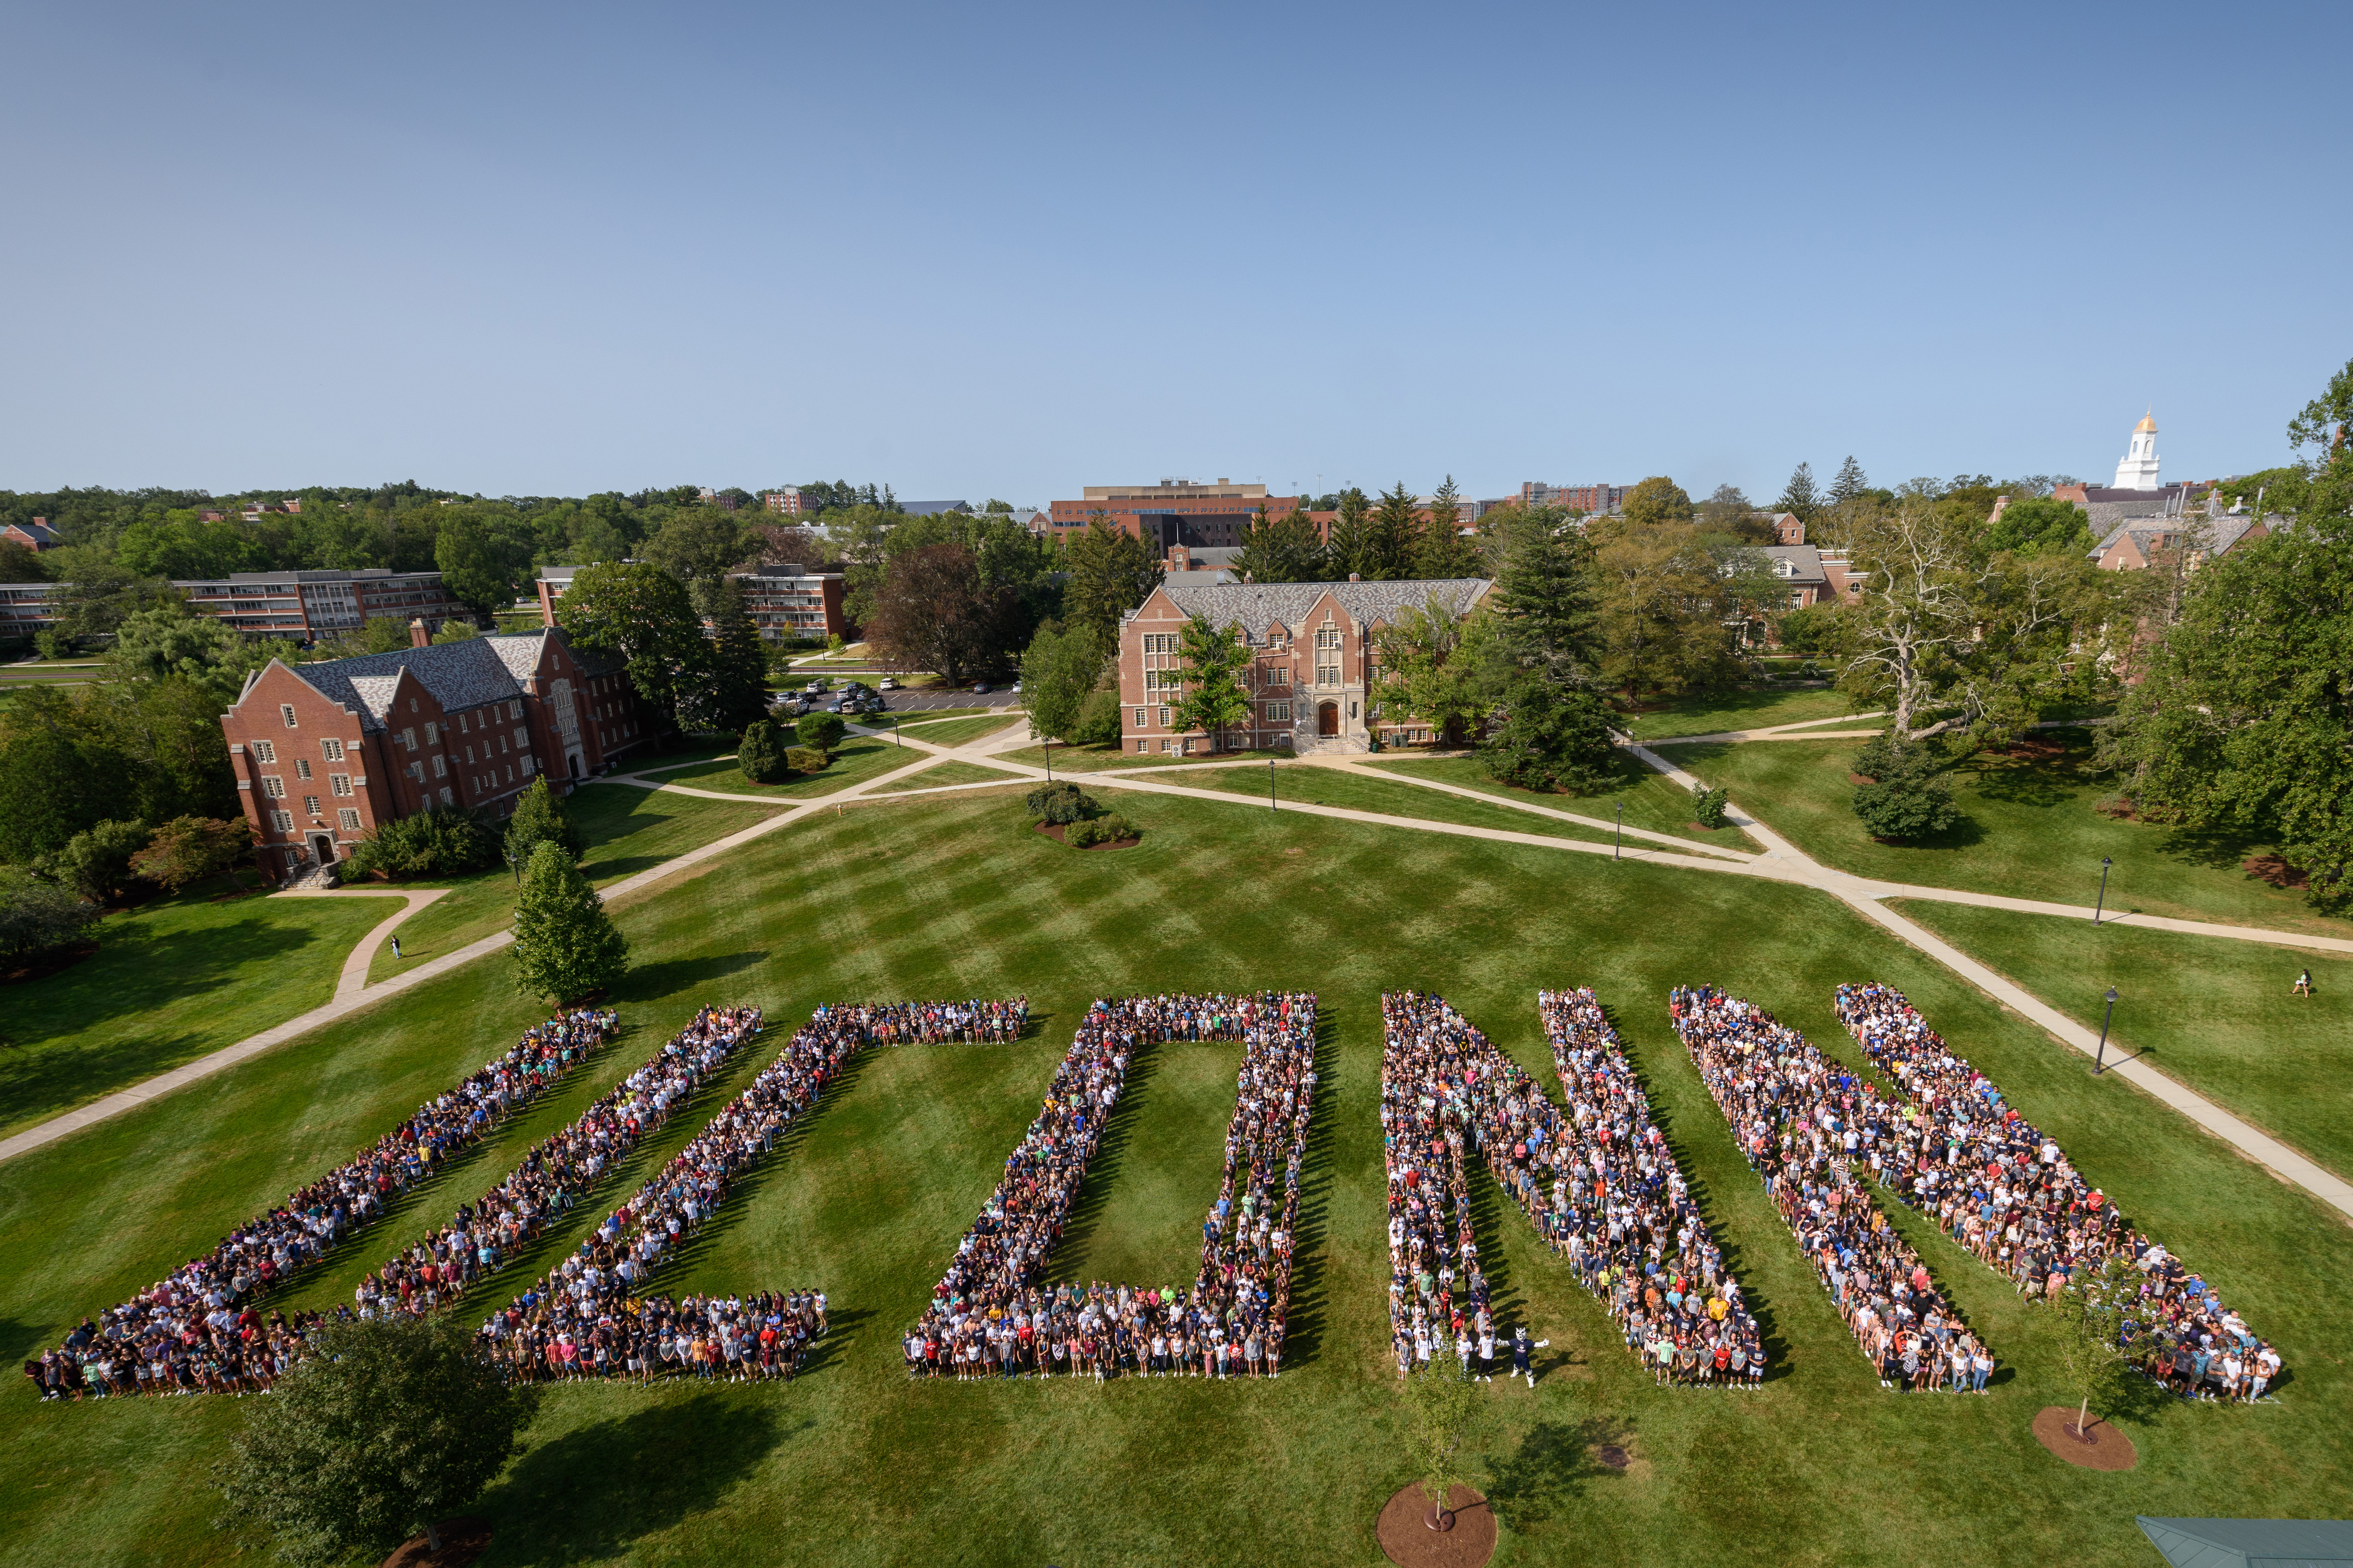 Members of the Class of 2021 pose on the Great Lawn for their class photo on Aug. 26, 2017. (Peter Morenus/UConn Photo)